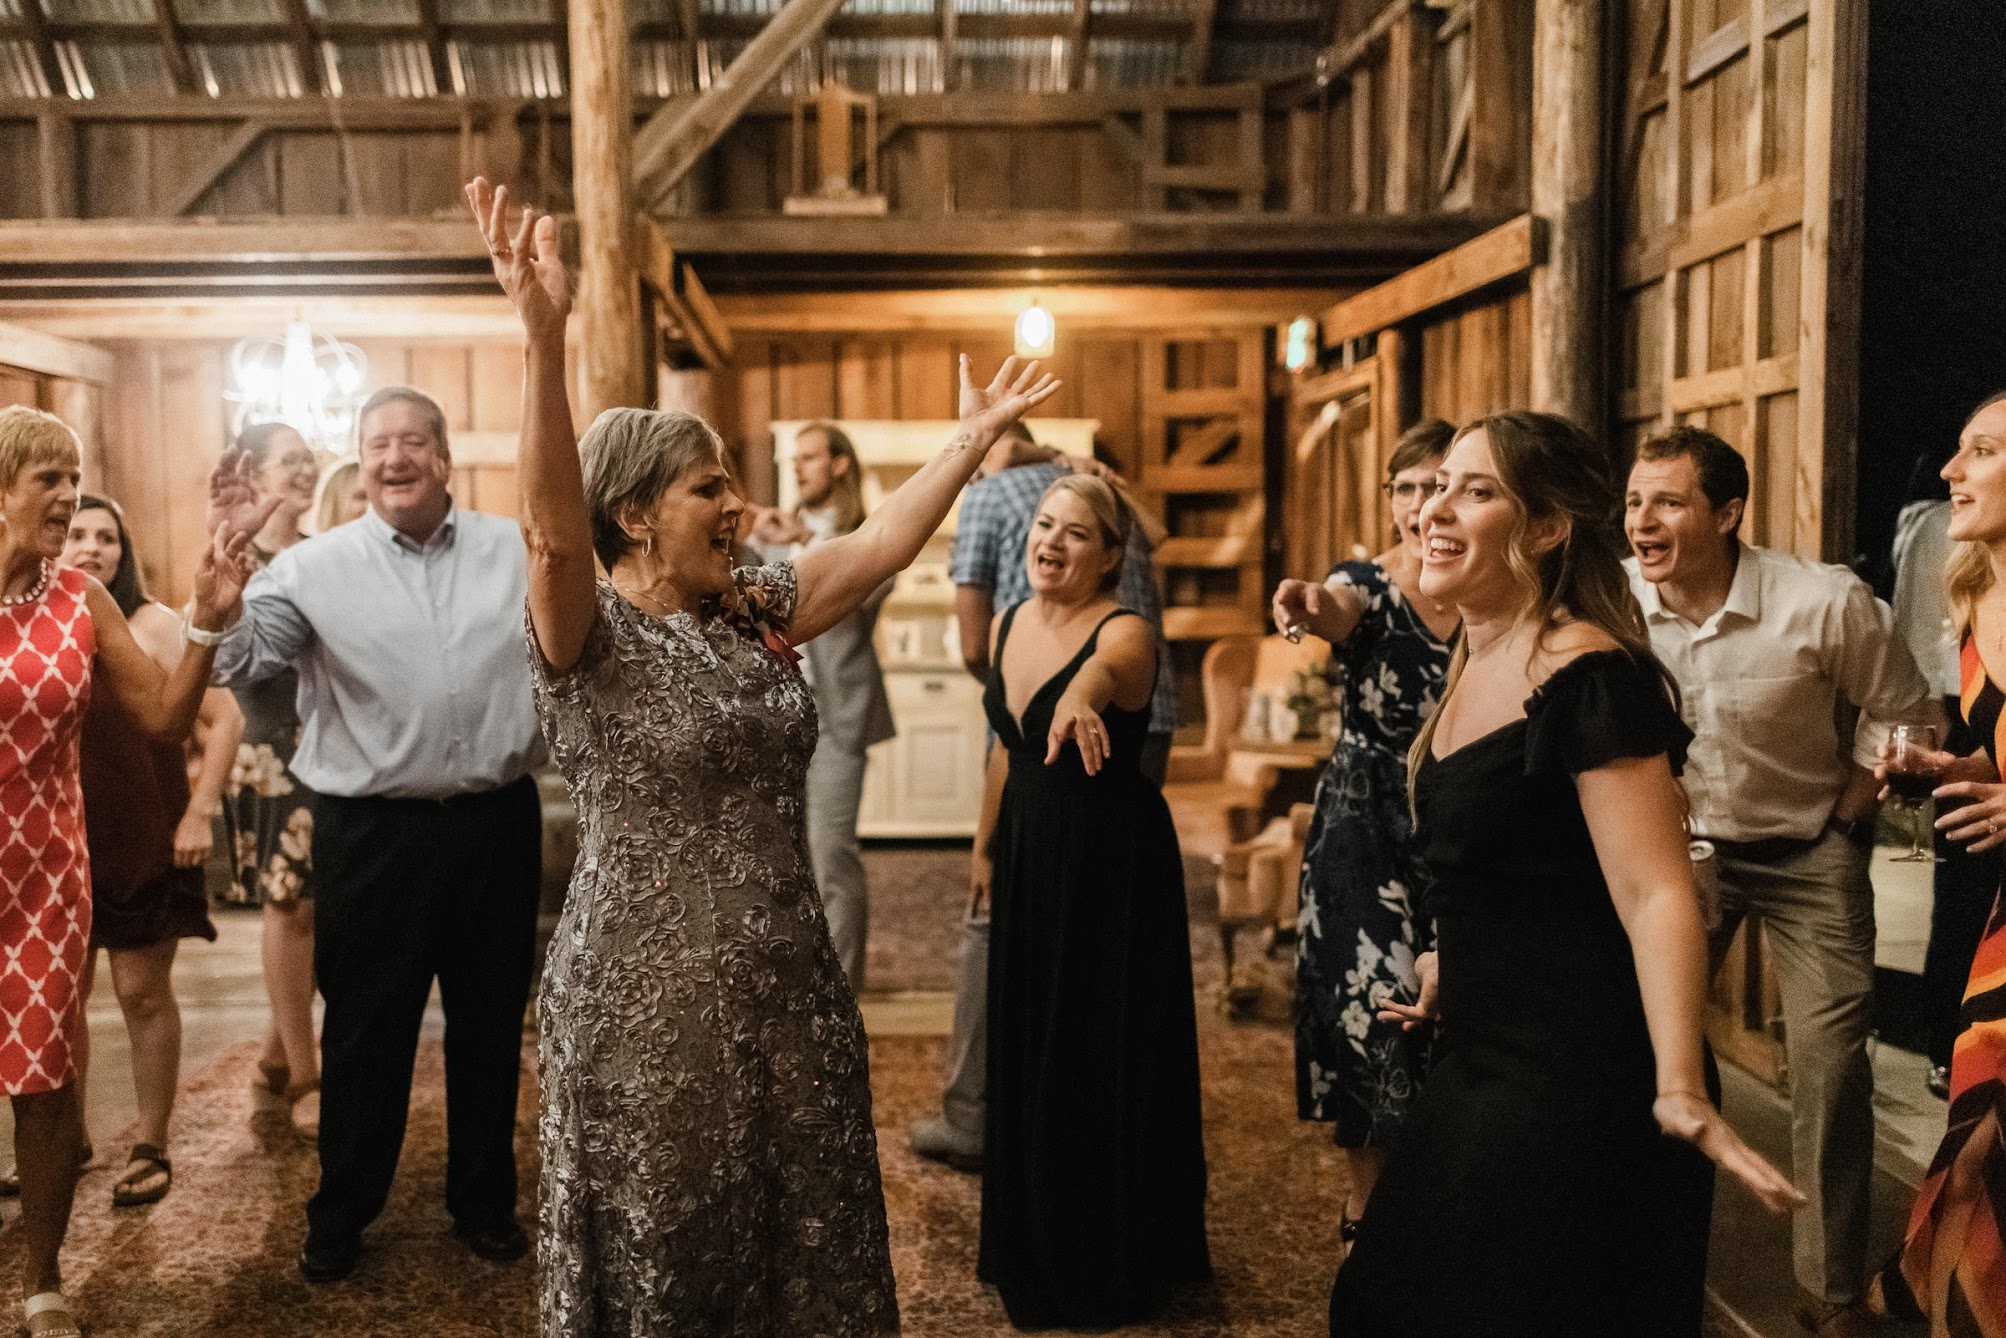 Mother of the bride and bridesmaid dancing together while everyone else watches and signs along.